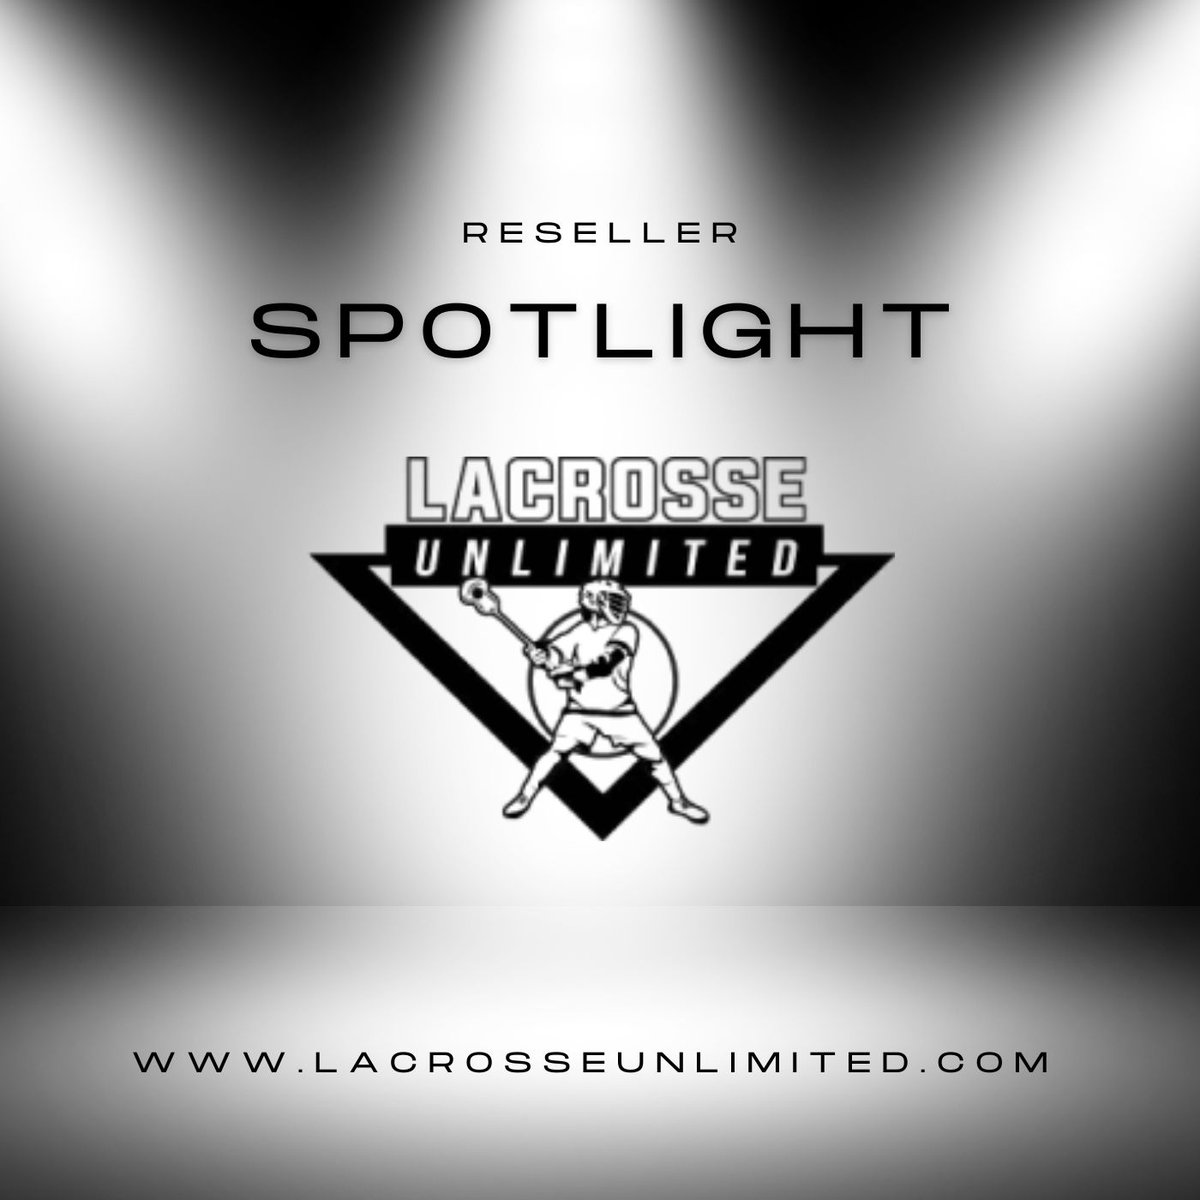 RESELLER SPOTLIGHT!

We wanted to give our friends over at @lacrosseunlimited a shoutout - if your in the market for any lacrosse equipment this is your place to shop! They are stocked with tons of items including the All Ball Pro!

#AllBallPro #Reseller #GameChanger